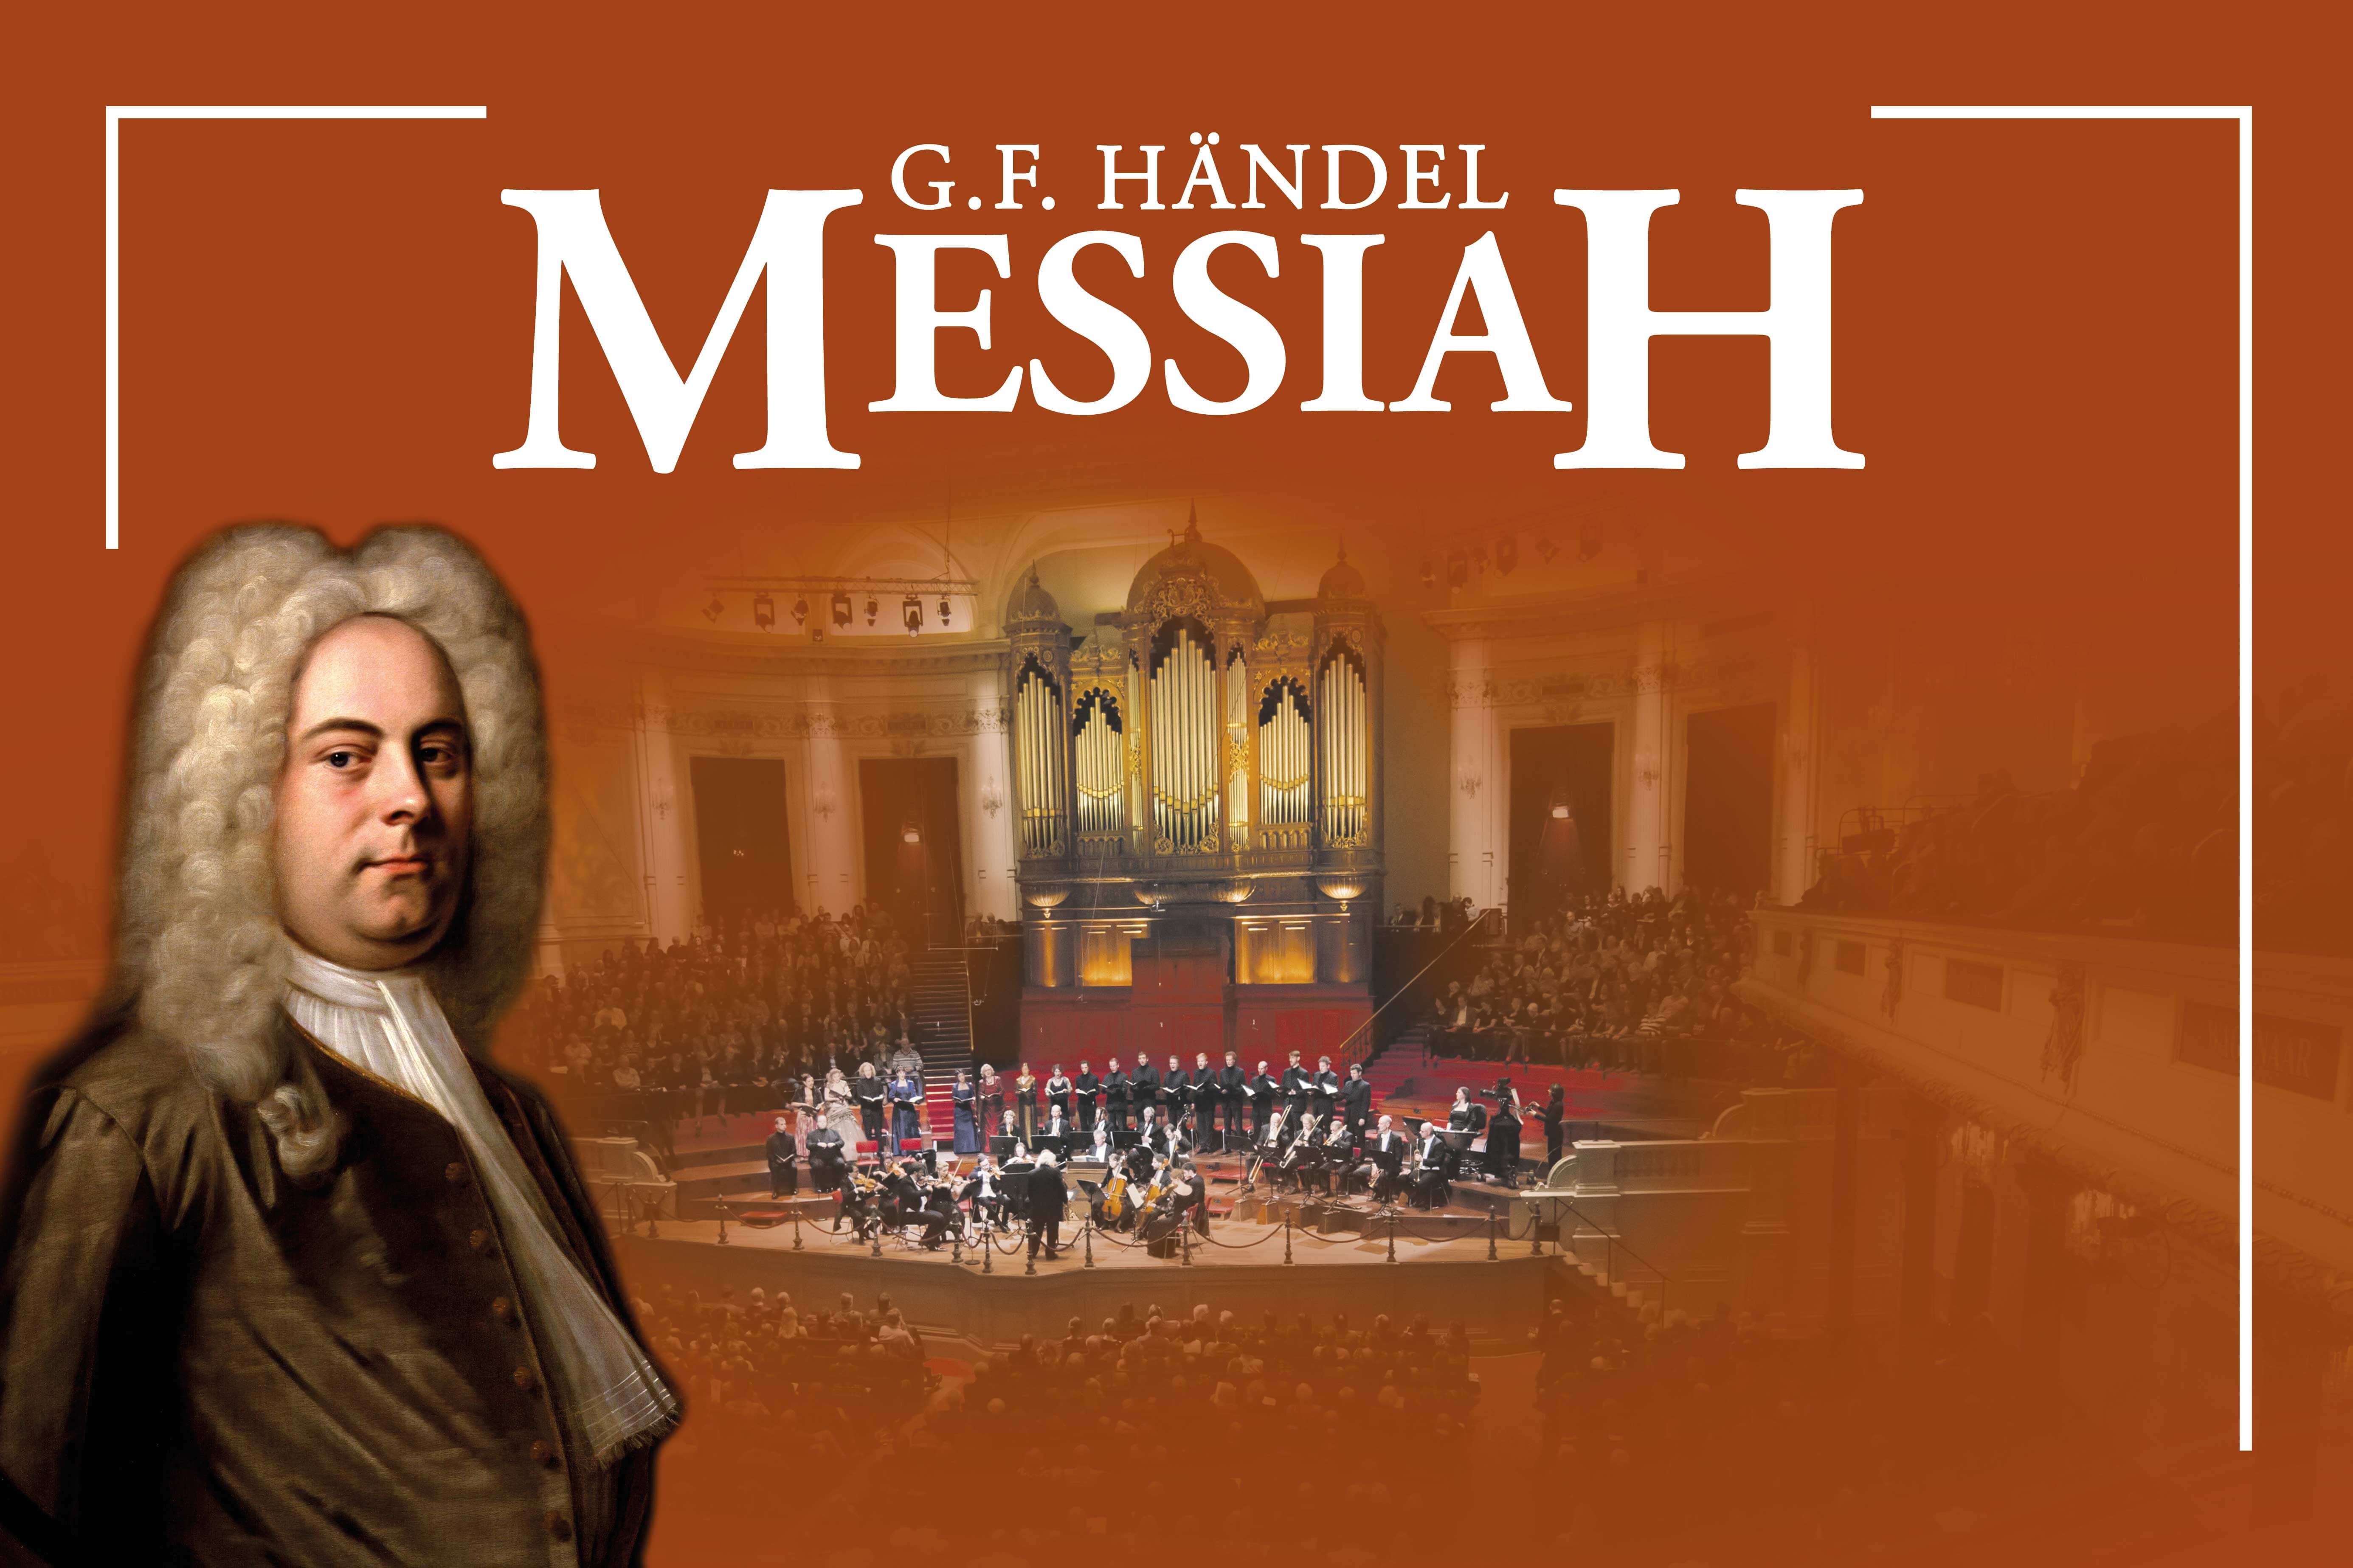 Messiah-Bach Orchestra of the Netherlands